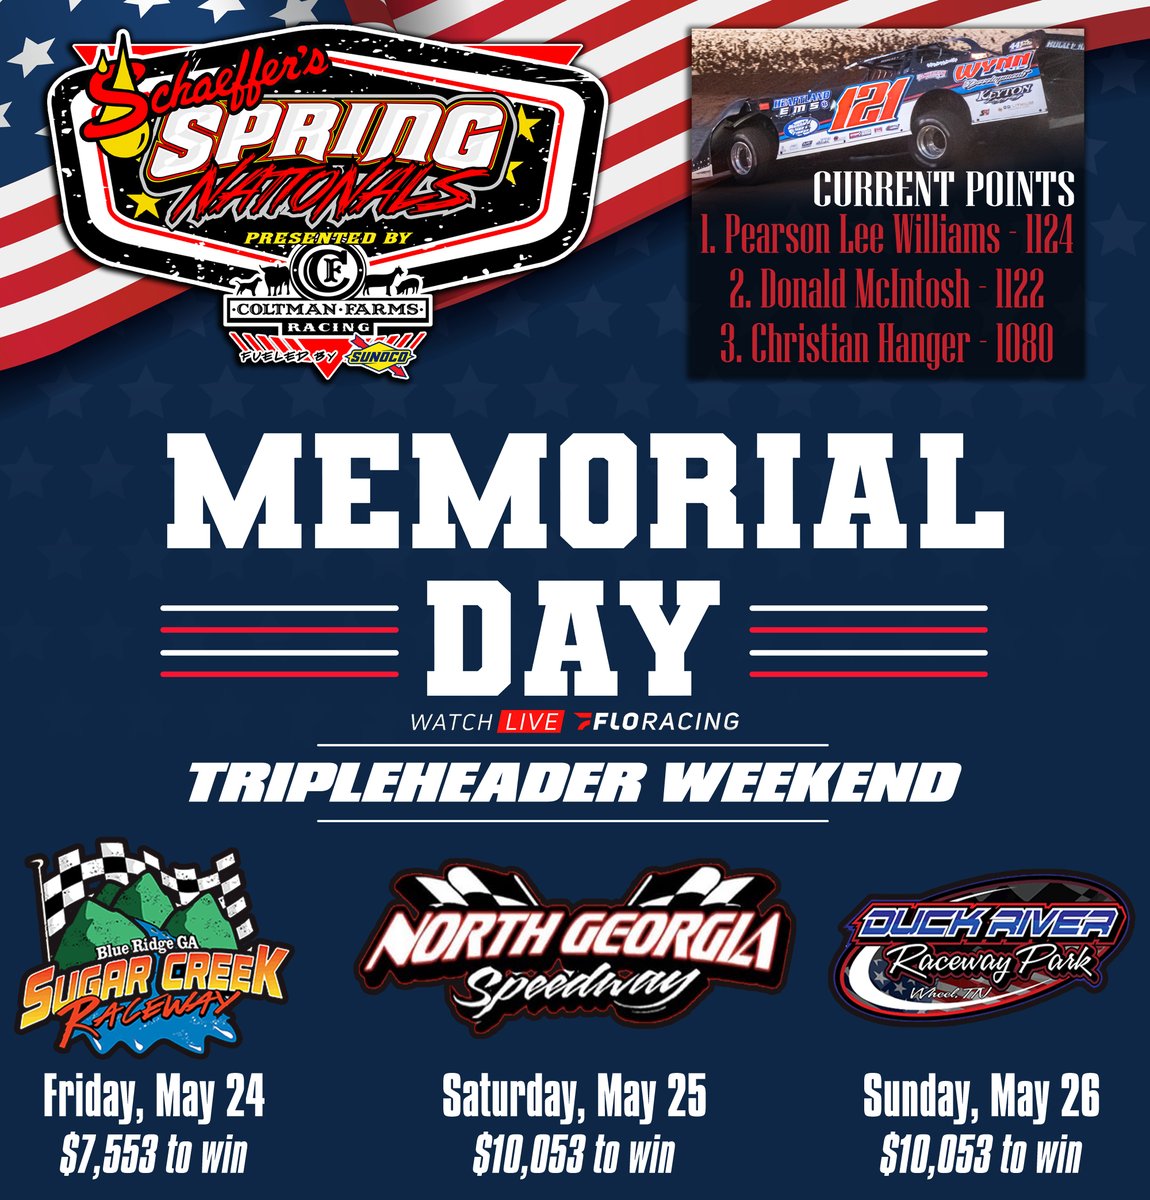 💥 ONE WEEK AWAY! The @SchaefferOil Spring Nationals rolls into GA & TN over the Memorial Day holiday weekend for a trio of big events! In addition to the $27,000+ in first place prizes, a Champion will be crowned following the point finale on Sunday at Duck River Raceway Park.